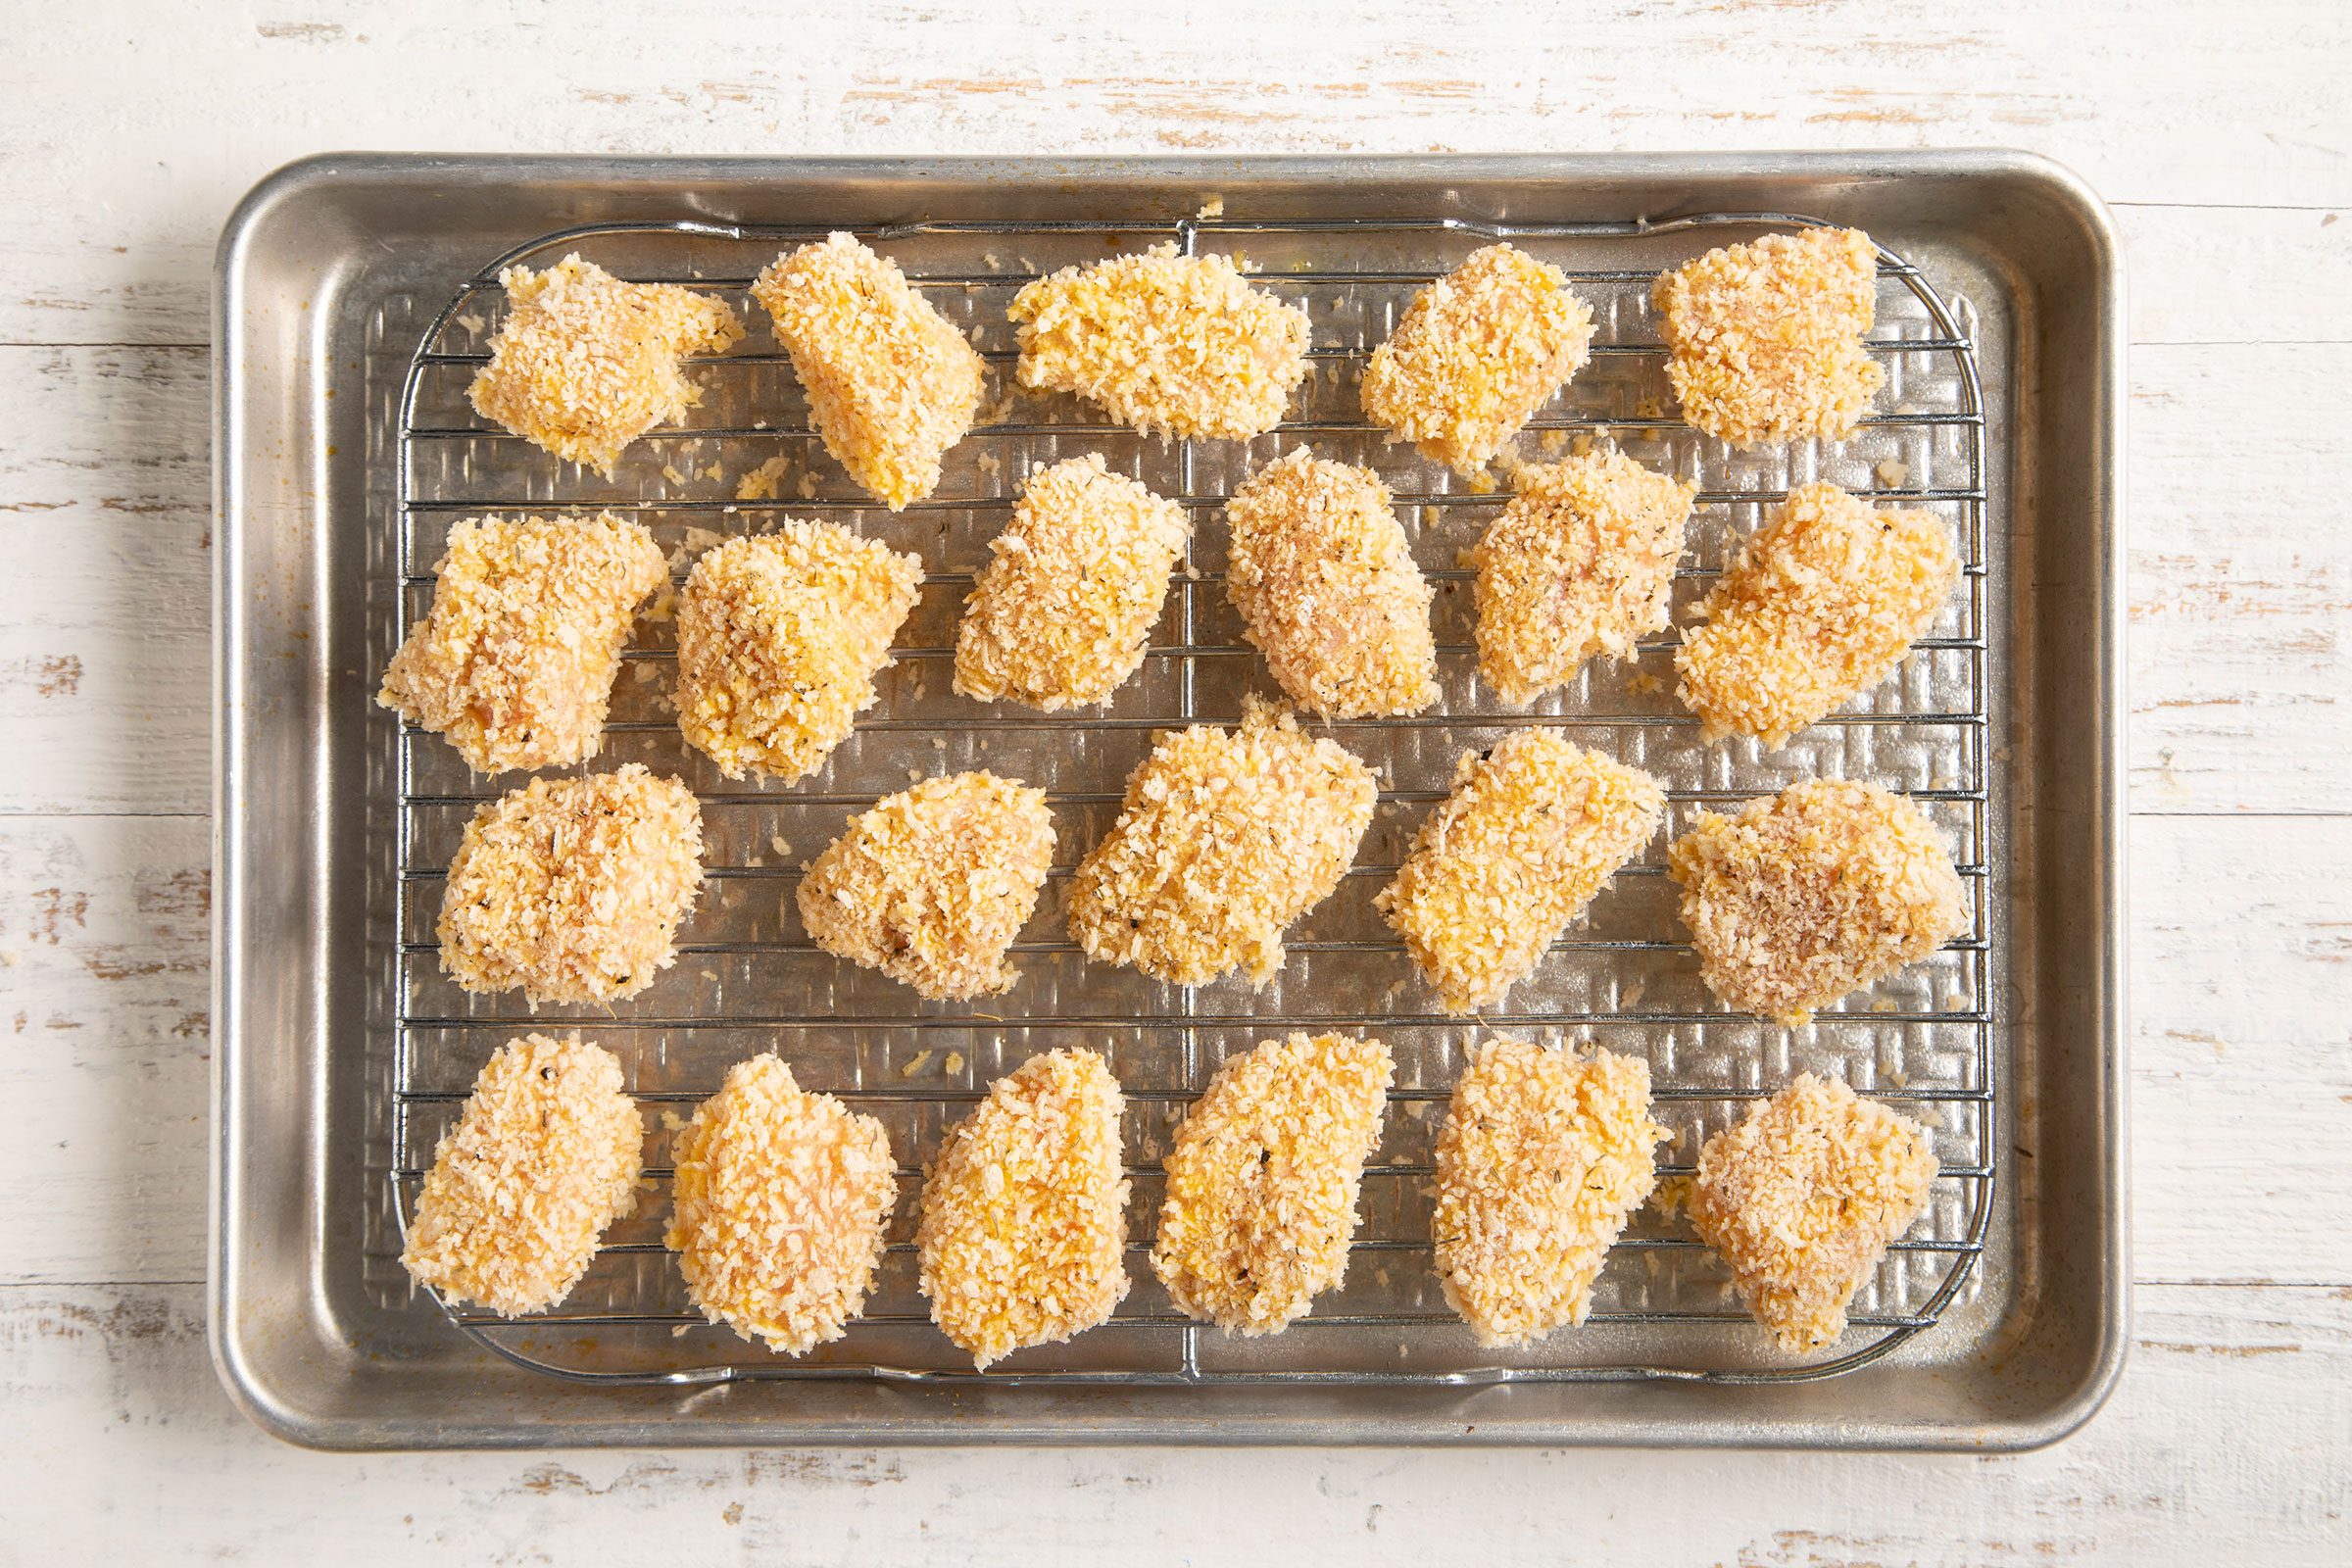 How To Make Baked Chicken Nuggets Step 5